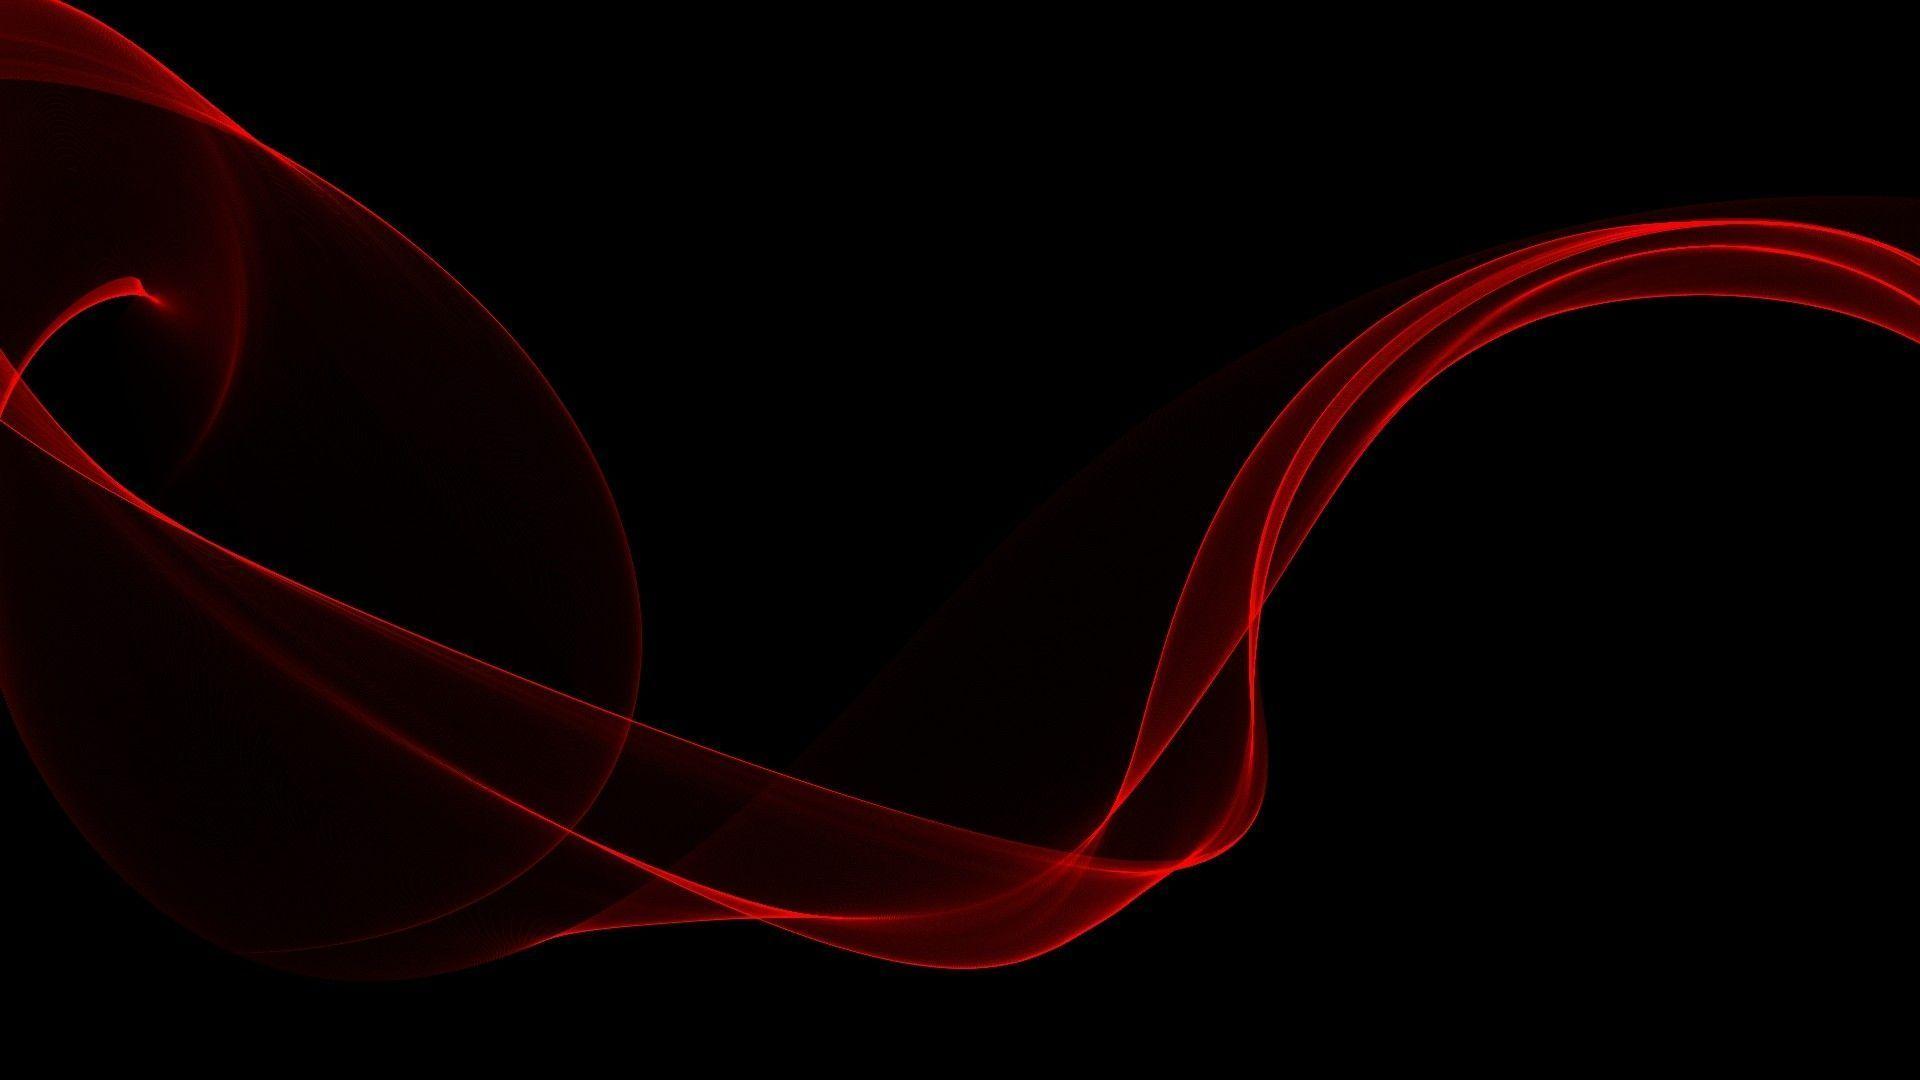 Black And Red Wallpaper HD Wallpaper 1600×1200 Black And Red Abstract Wallpaper (73 Wallpaper). Red and black wallpaper, Dark red wallpaper, Black wallpaper